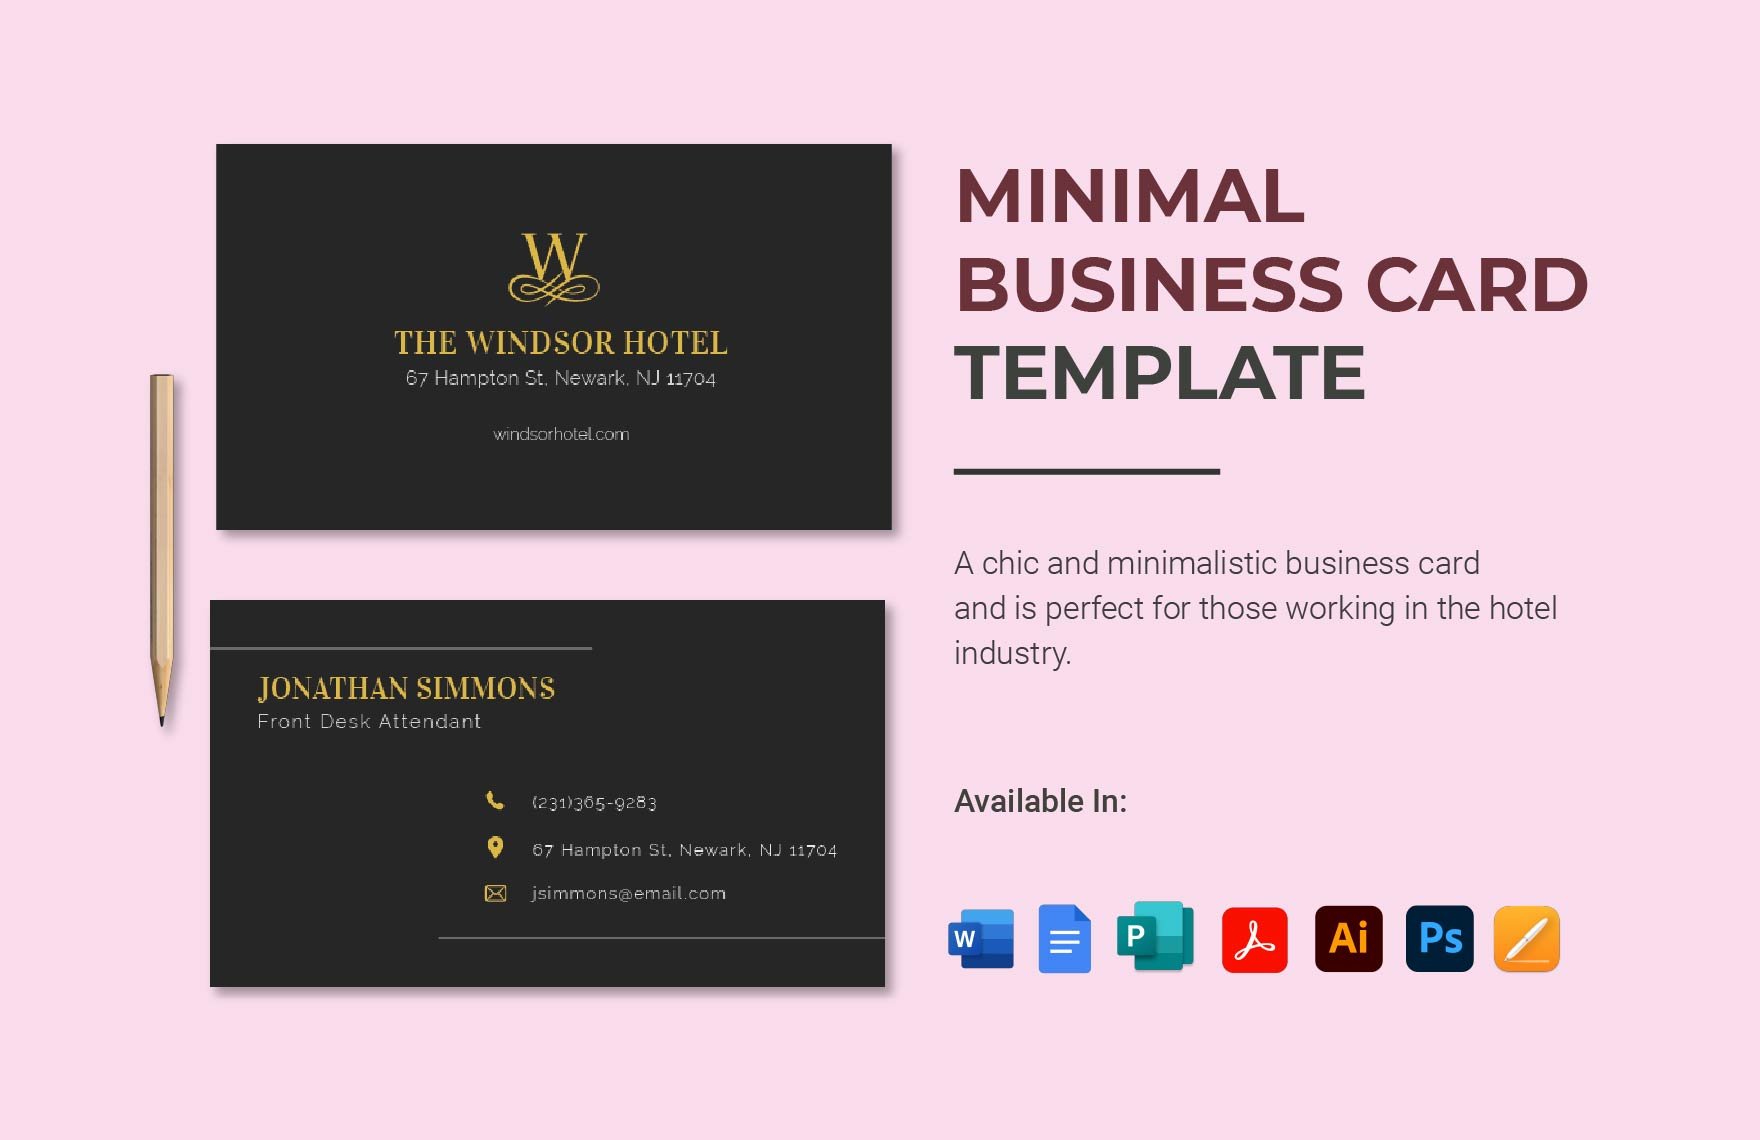 Free Minimal Business Card Template in Word, Google Docs, PDF, Illustrator, PSD, Apple Pages, Publisher